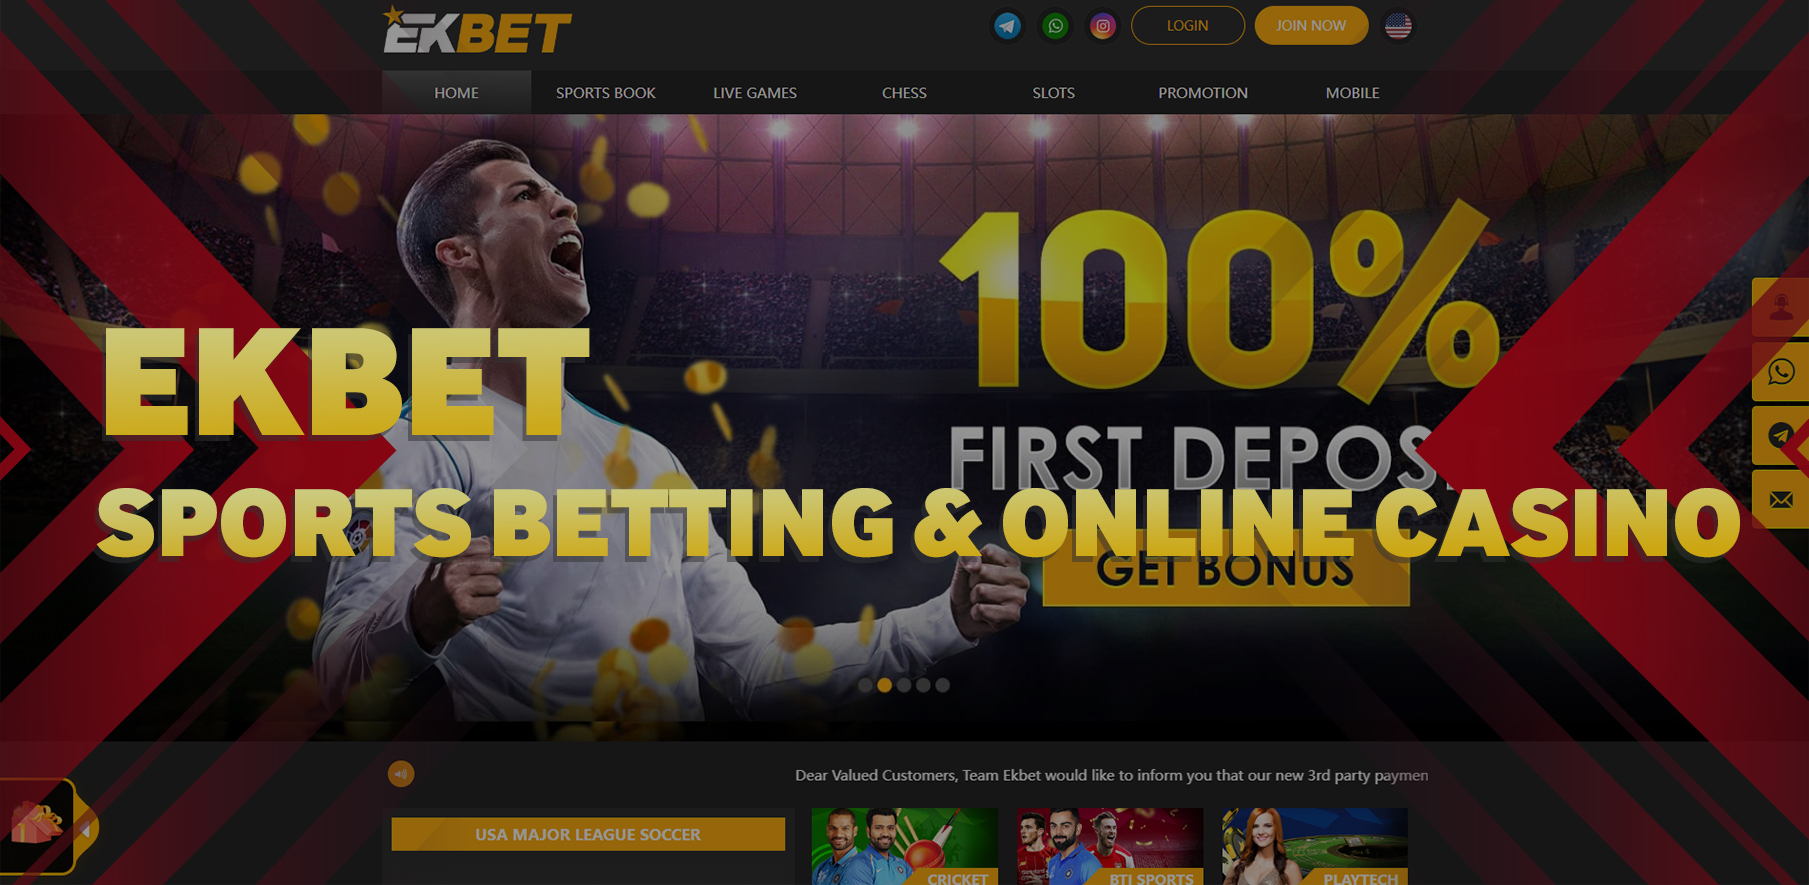 Ekbet Online in India - Sports Betting and Casino Website